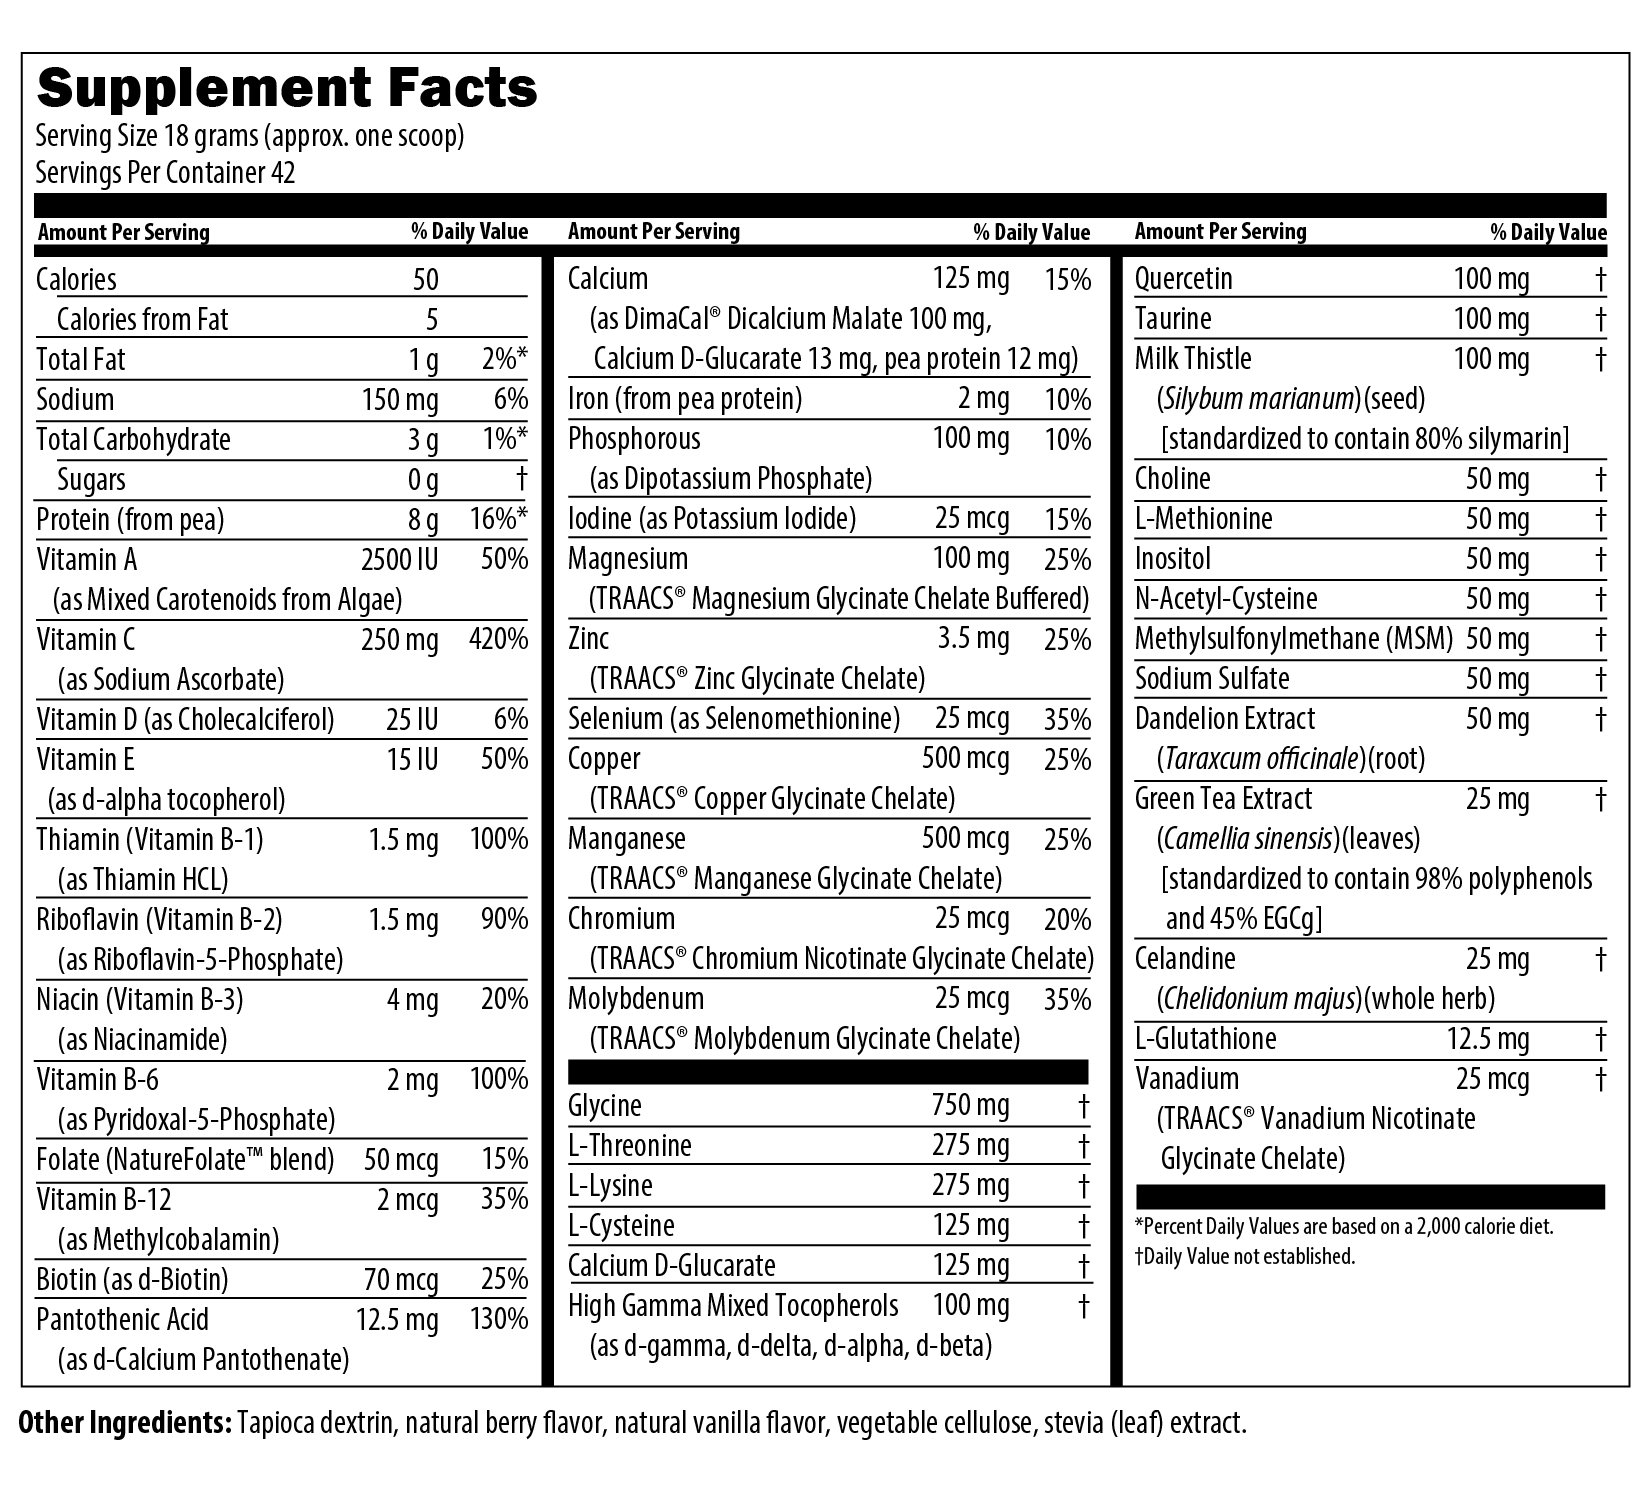 PCL756-Supplement Facts_CLEANSE